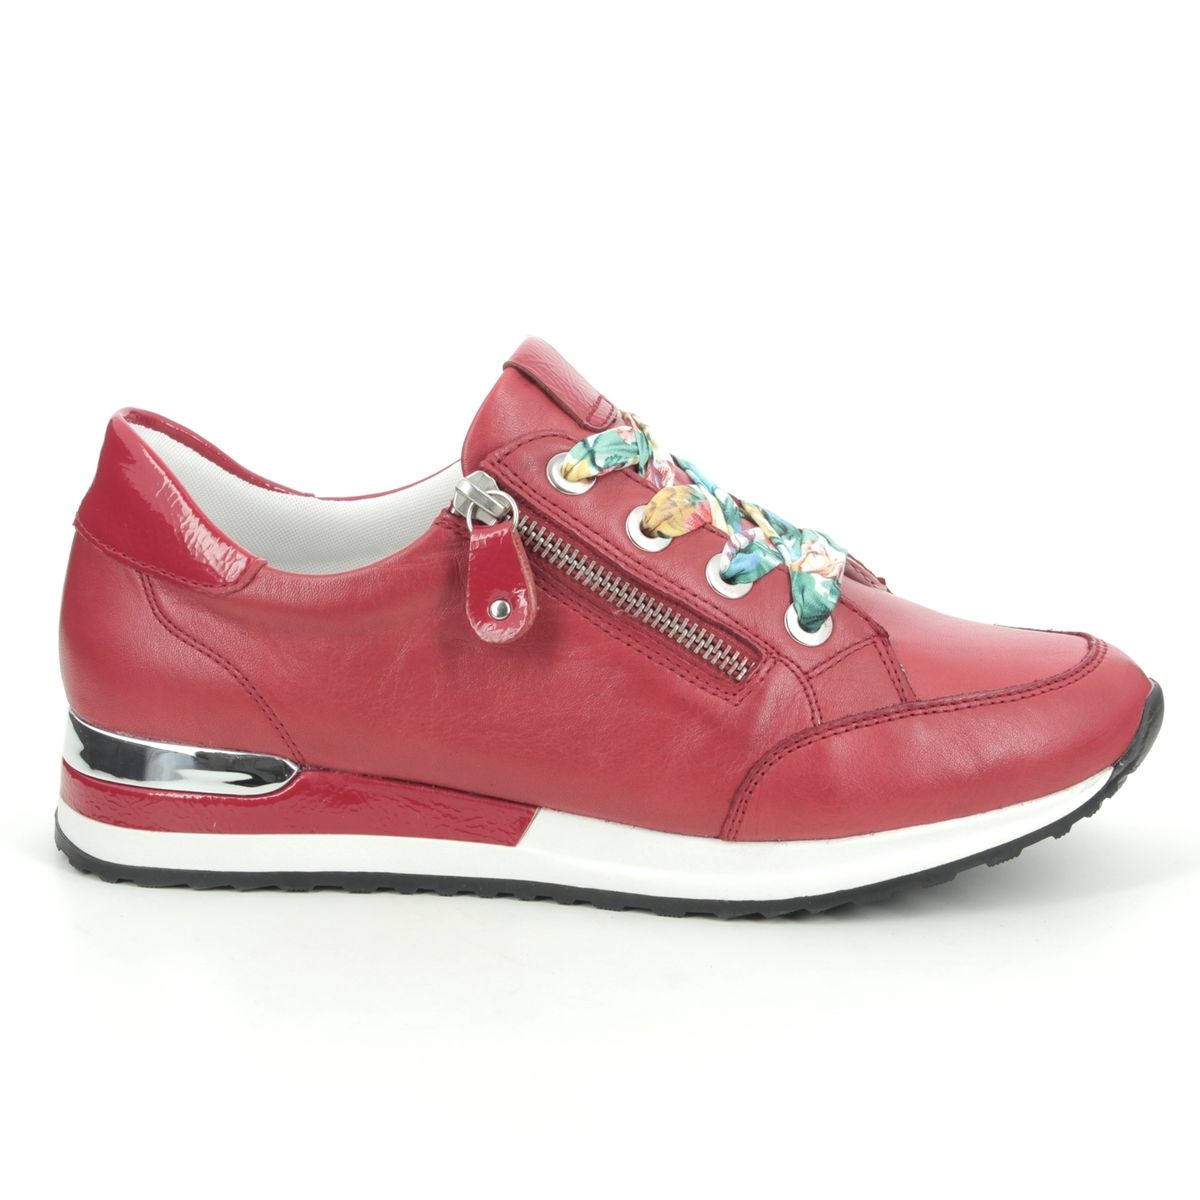 Remonte Vapozip R2528-33 Red leather trainers